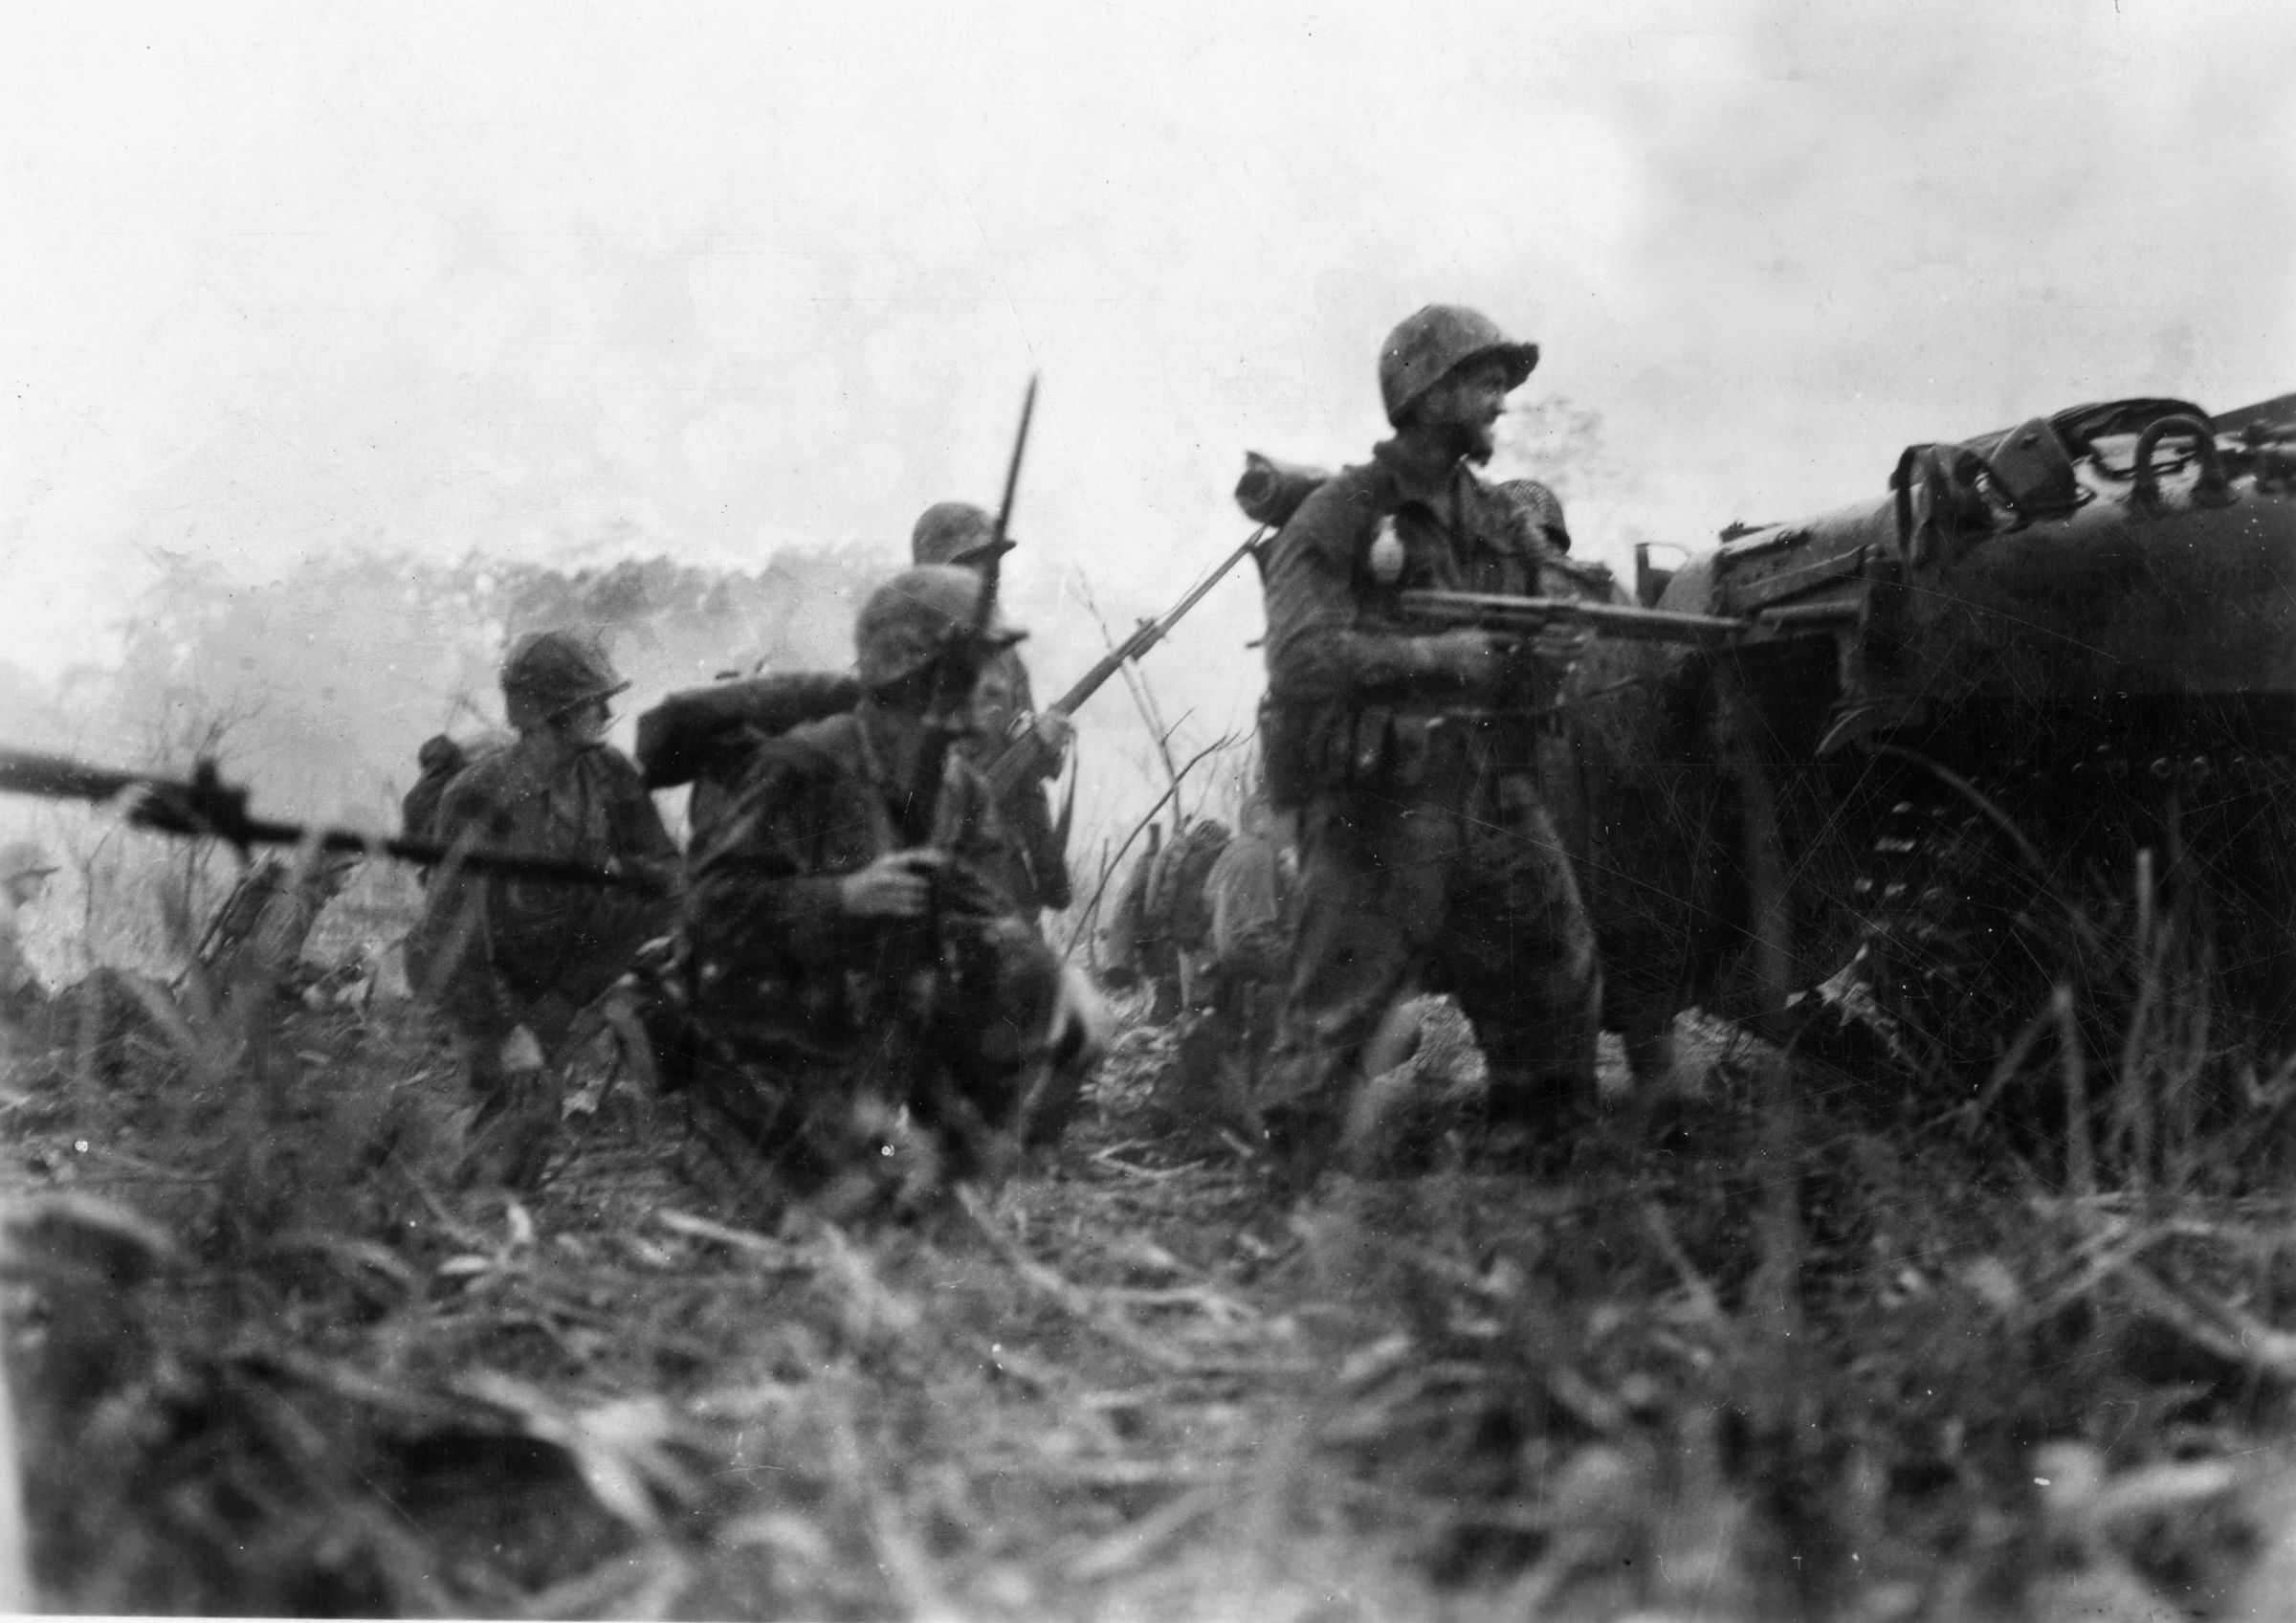 Thick jungle and heavy rains impeded the American advance at Cape Gloucester. However, tanks were employed despite the deplorable conditions and rugged terrain. Here, a group of advancing Marines is covered by a tank that uses its .50-caliber machine gun for suppressing fire.